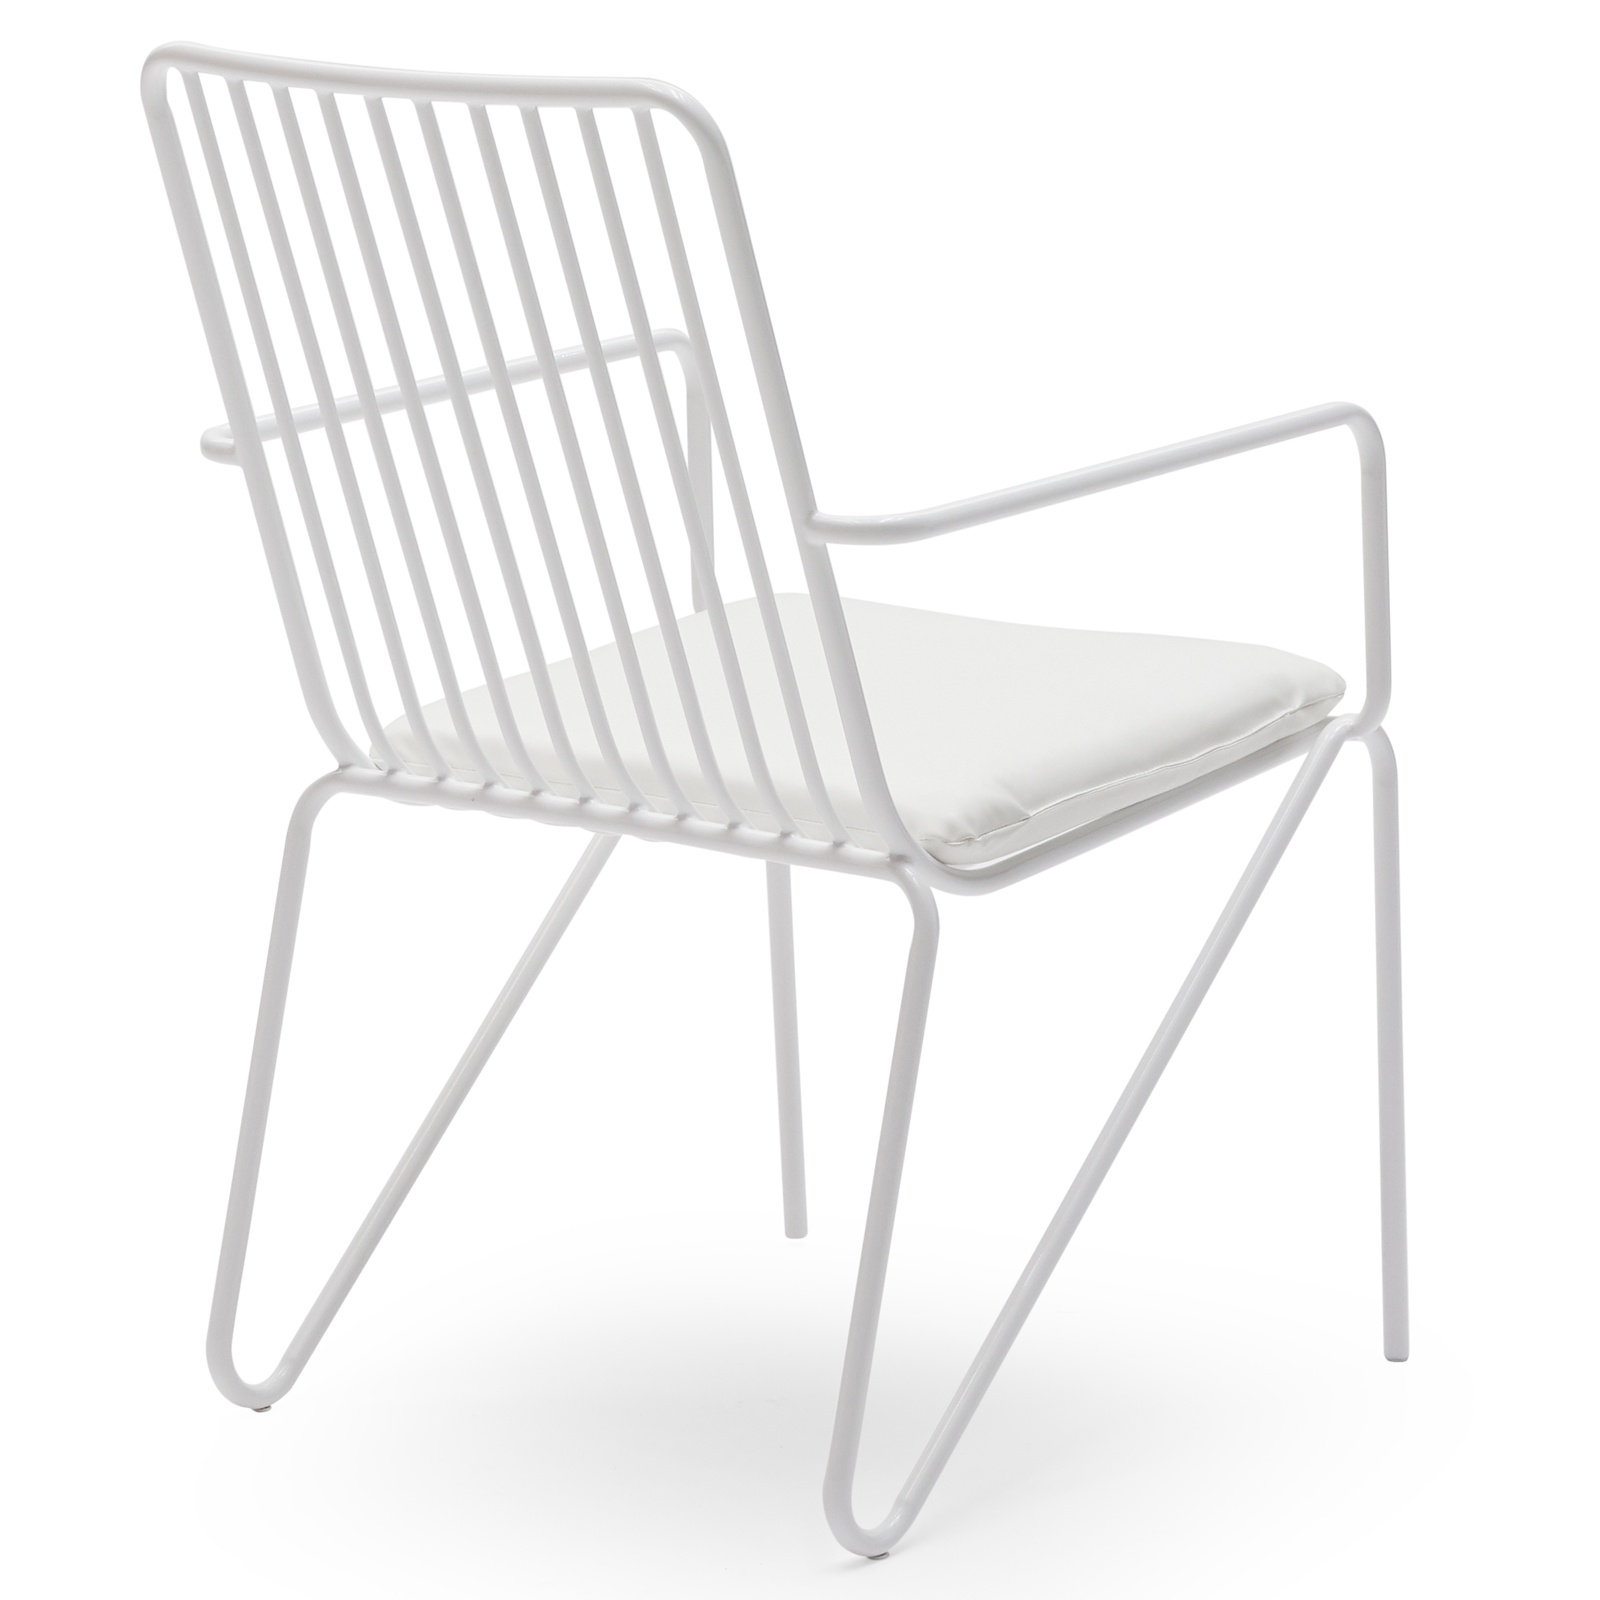 MoDRN Industrial Wrought Iron Stacking Dining Chair - Set of 2 - White (Chairs Only) - image 5 of 9